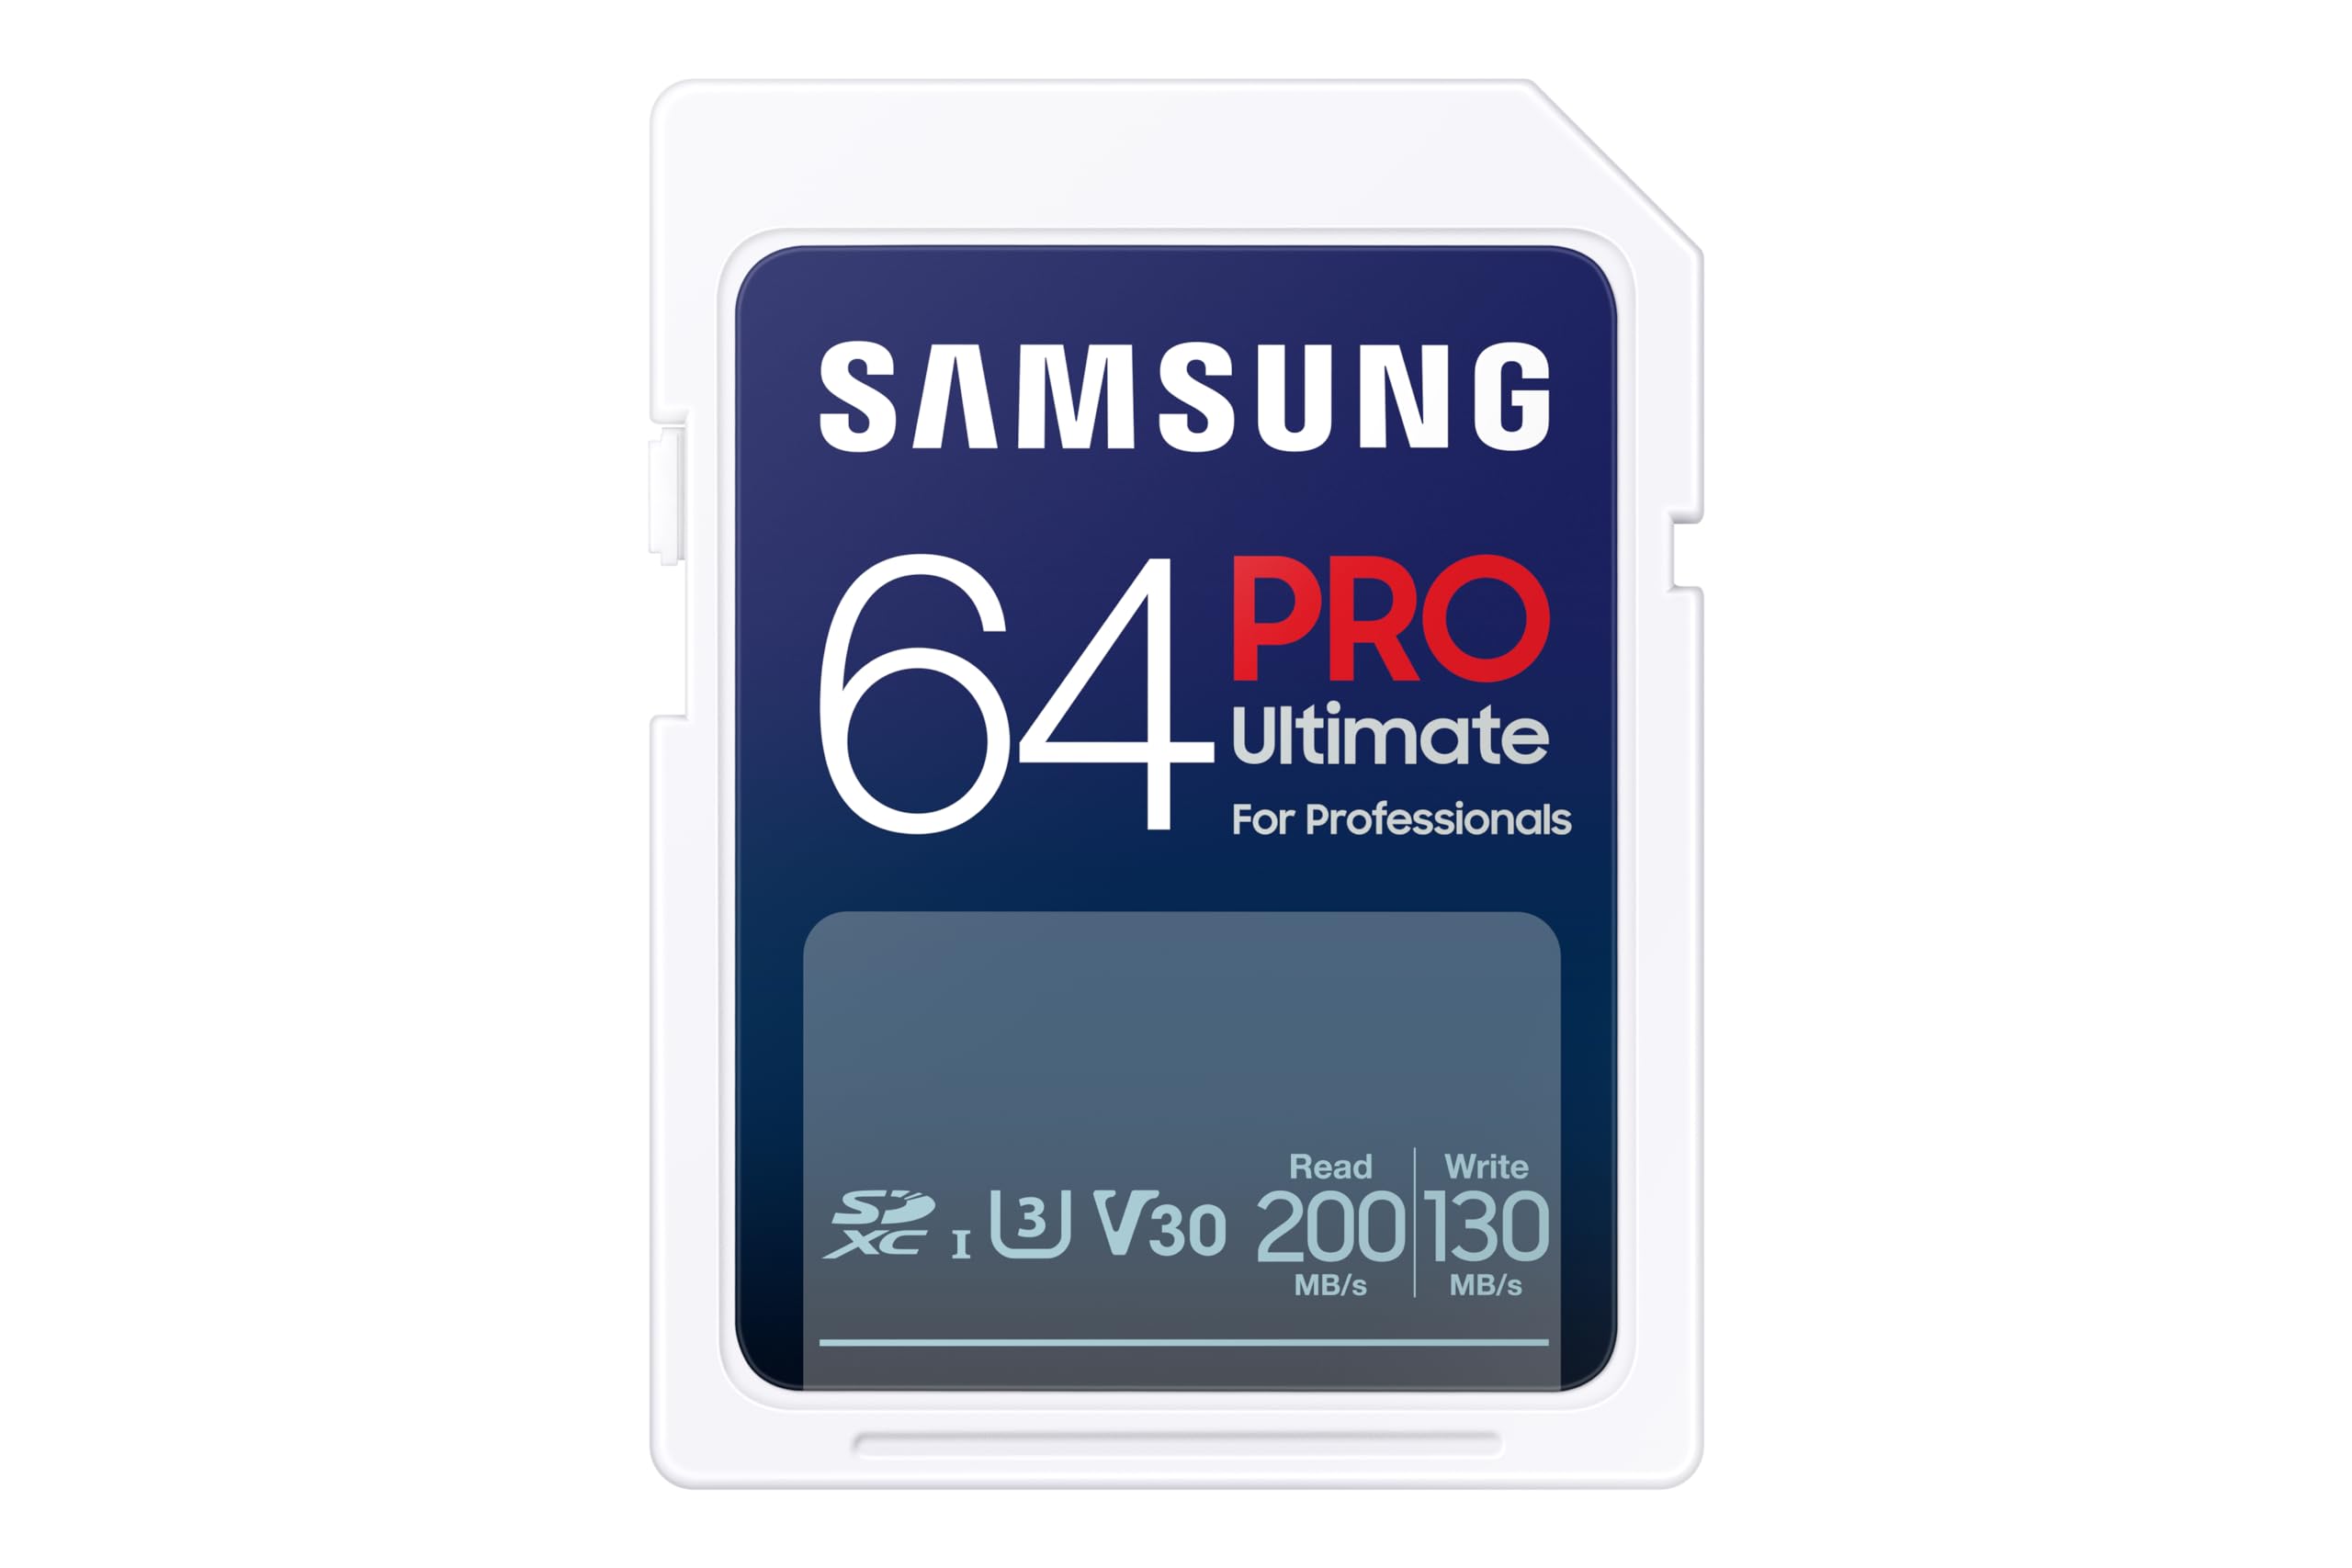 SAMSUNG PRO Ultimate Full Size 64GB SDXC Memory Card, Up to 200 MB/s, 4K UHD, UHS-I, C10, U3, V30, A2 for DSLR, Mirrorless Cameras, PCs, MB-SY64S/AM